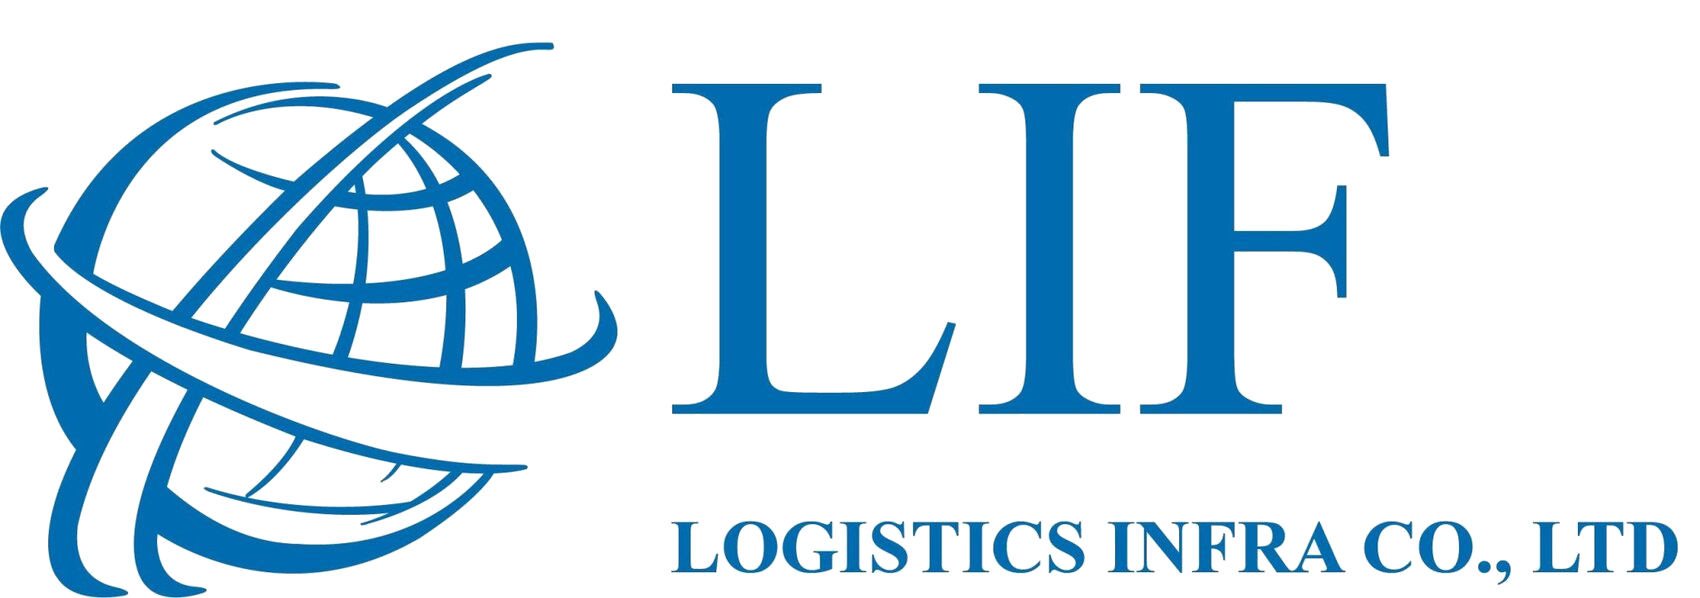 Logistic Infra Viet Nam (LIF) is a leading Intra-Logistics & Warehouse Automation Solution